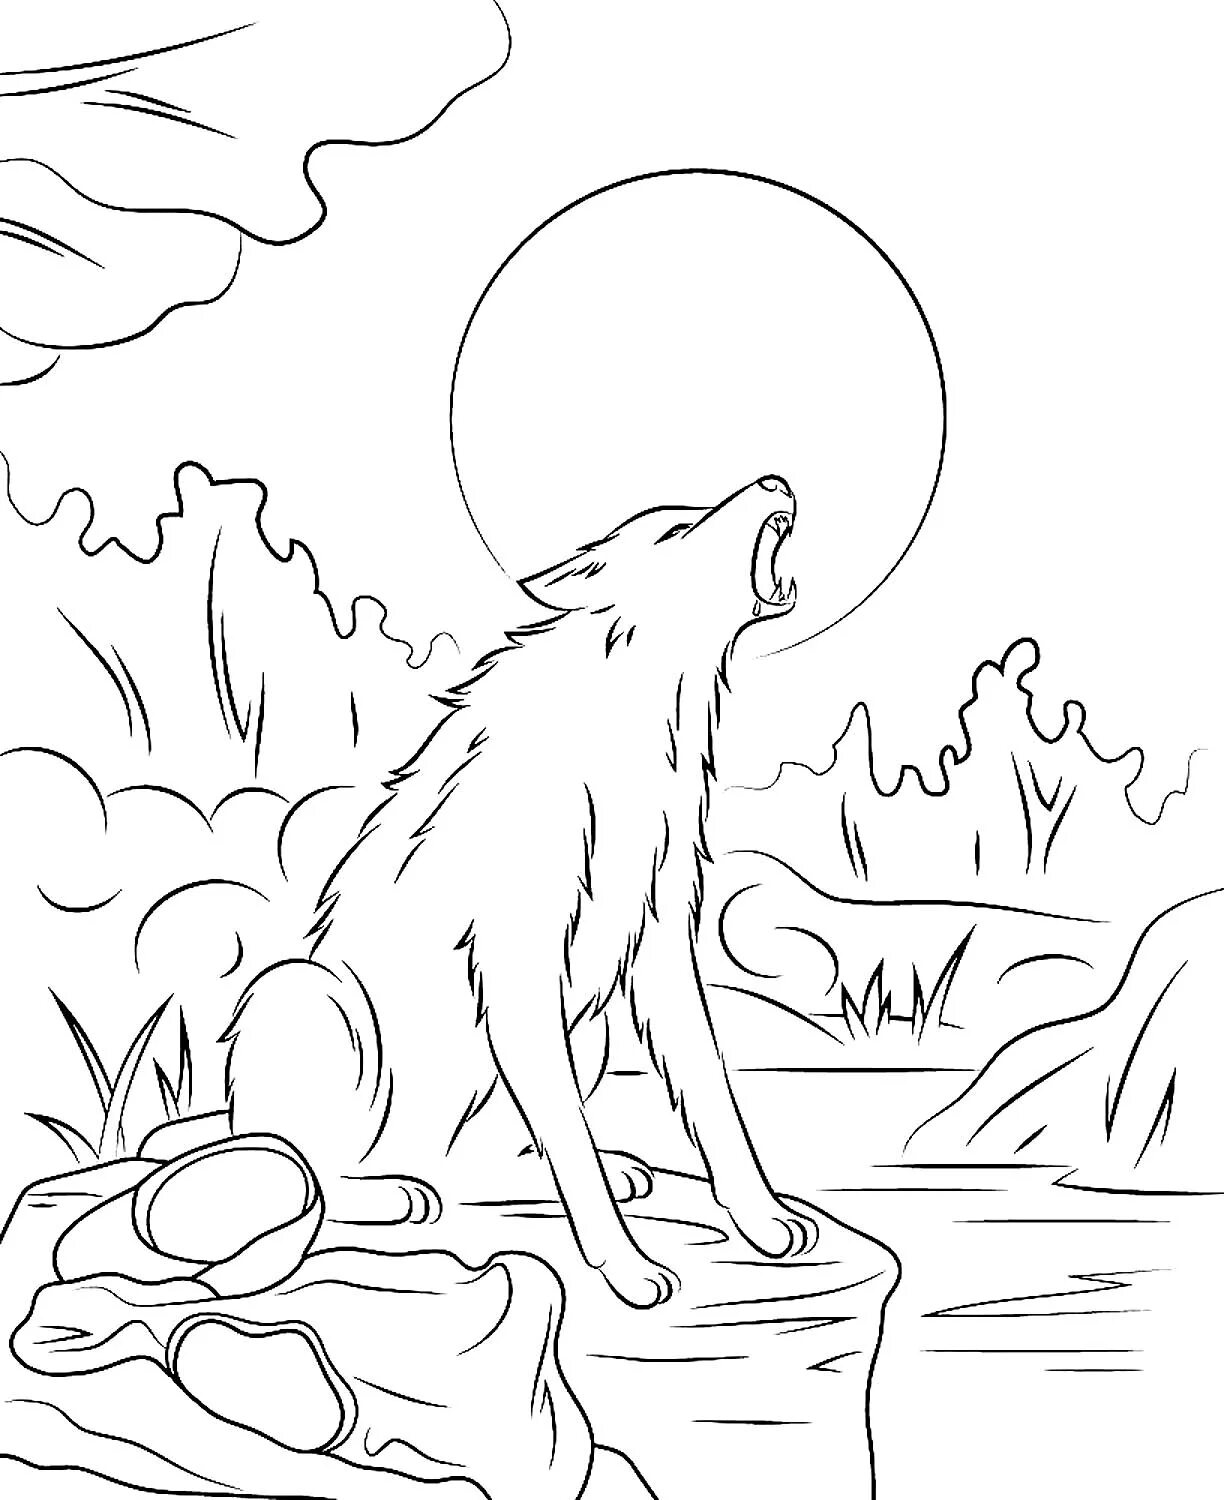 Wolf howling at the moon #13